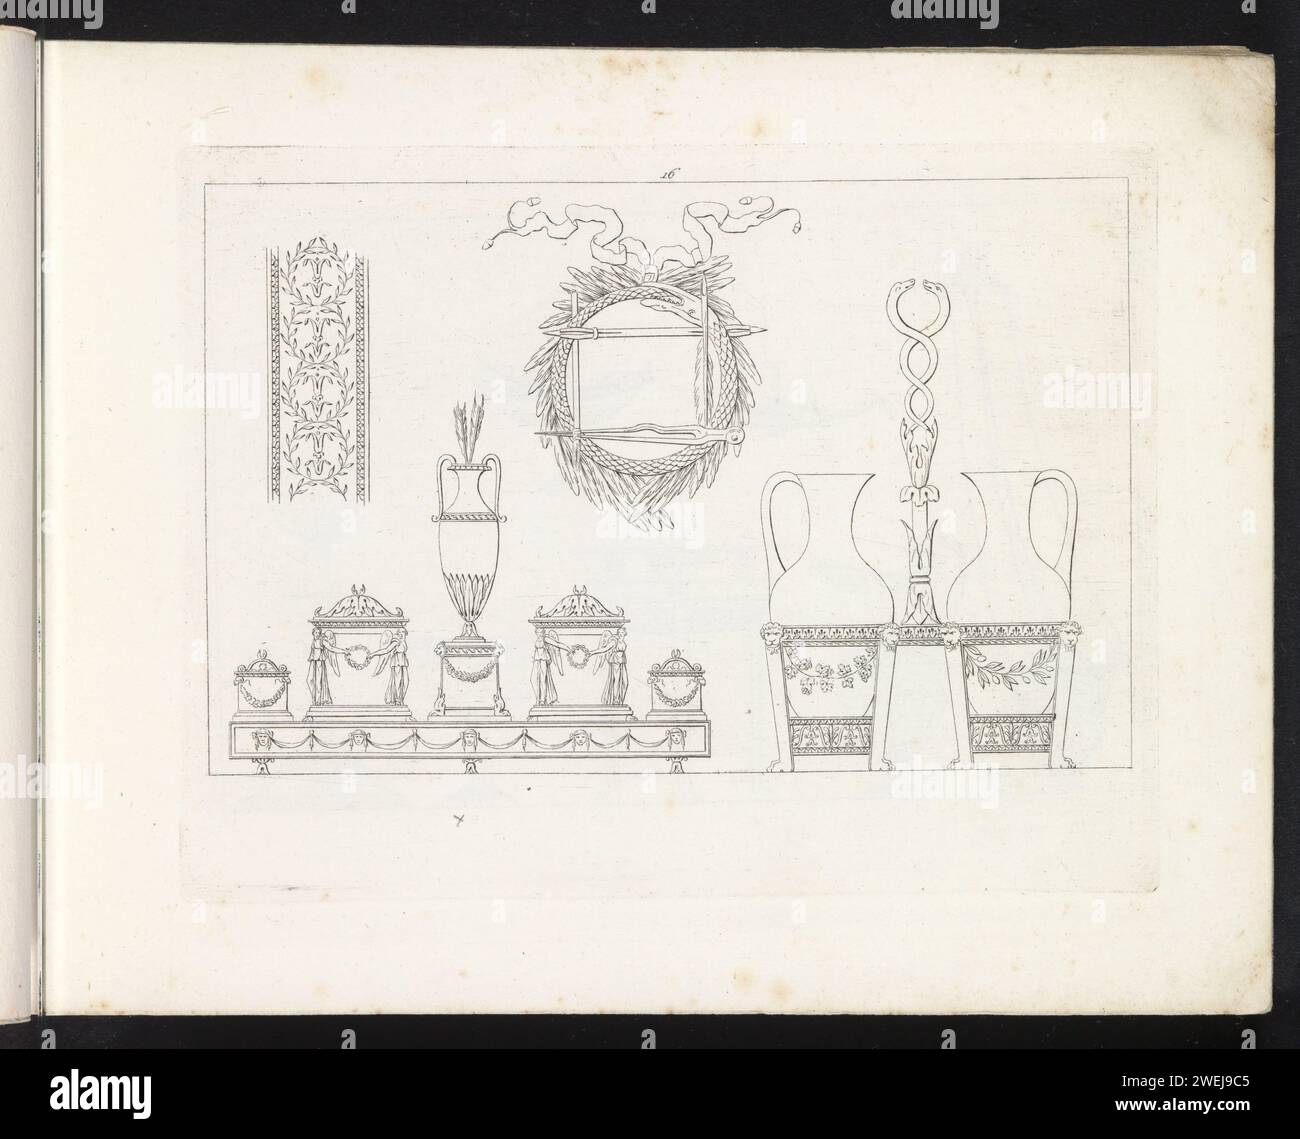 Ornamental edge, urns, vases and an Ouroboros, Pietro Ruga, After Lorenzo Roccheggiani, 1817 print Print is part of an album.  paper etching ornaments  art. serpent Ouroboros. urn. vase  ornament Stock Photo